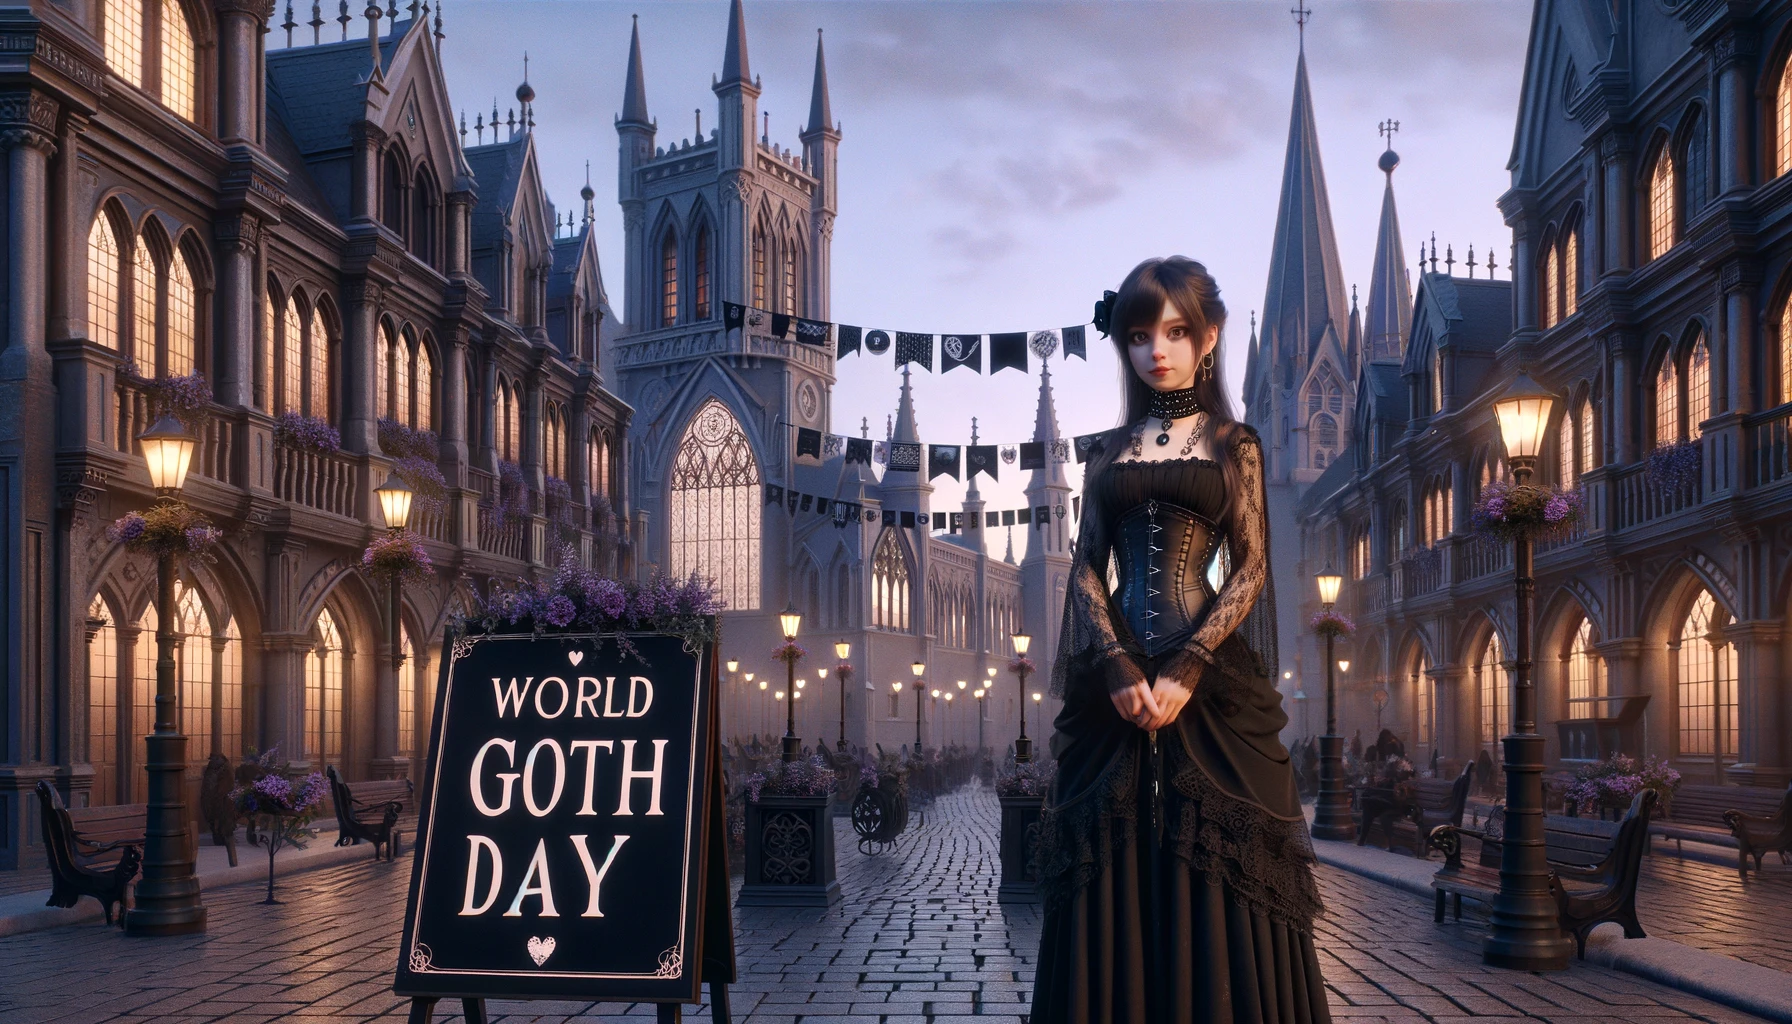 Flirty World Goth Day Messages for Someone Special